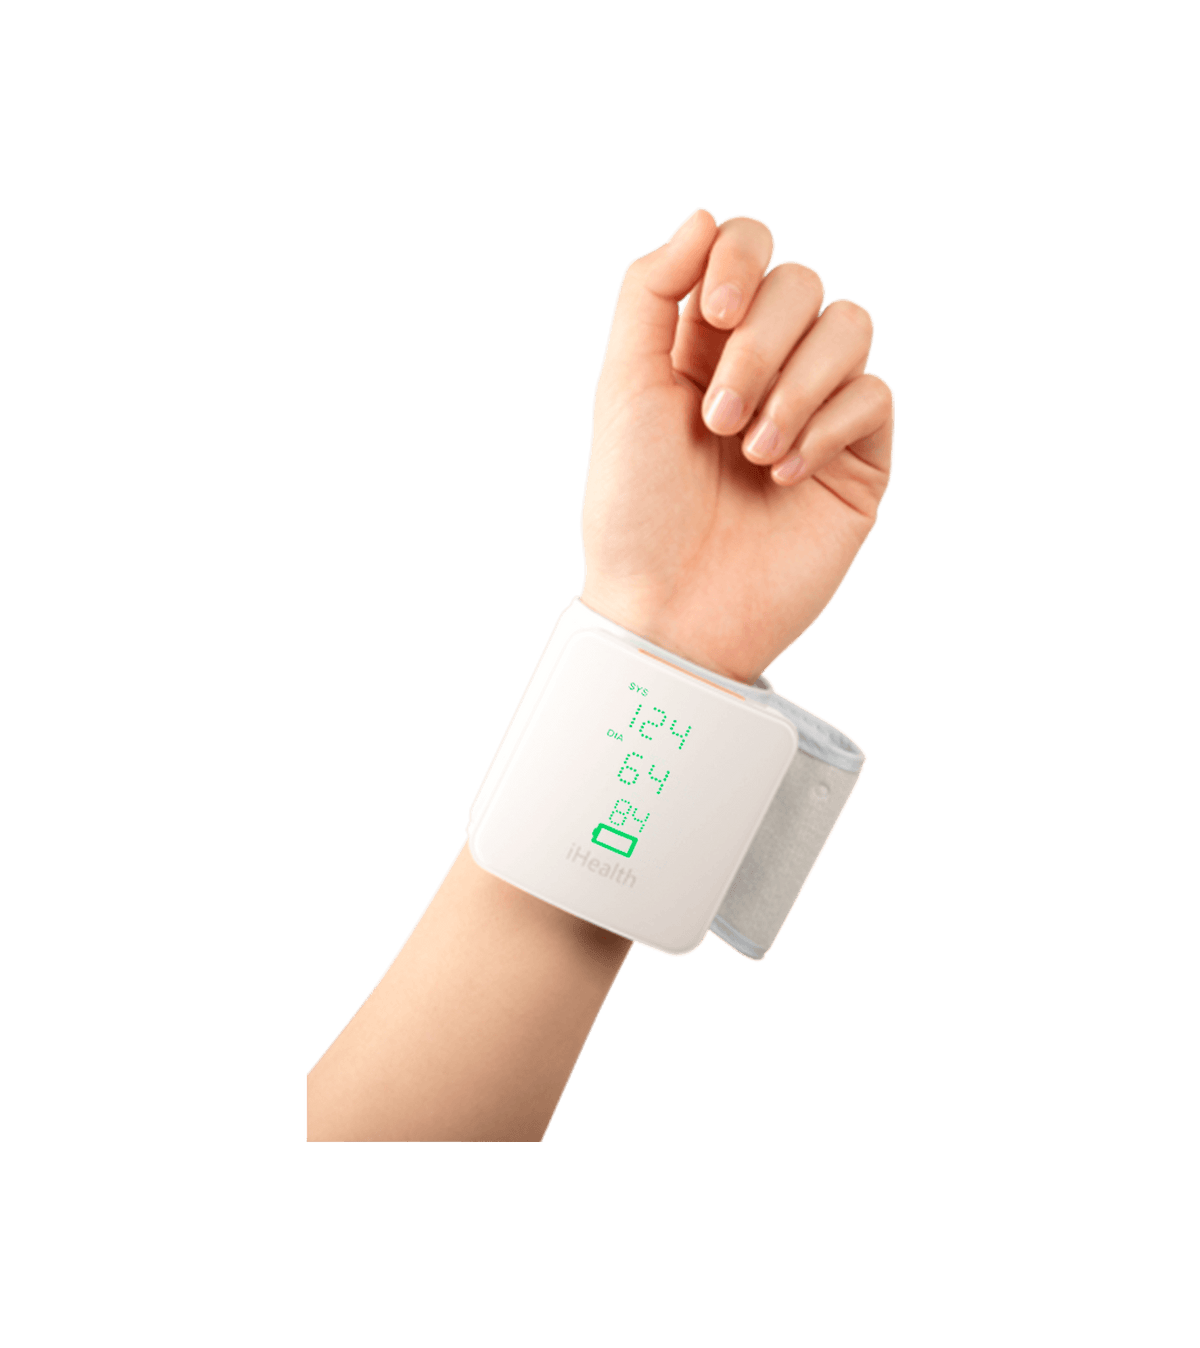 iHealth launches new health peripherals, including BP wrist cuff